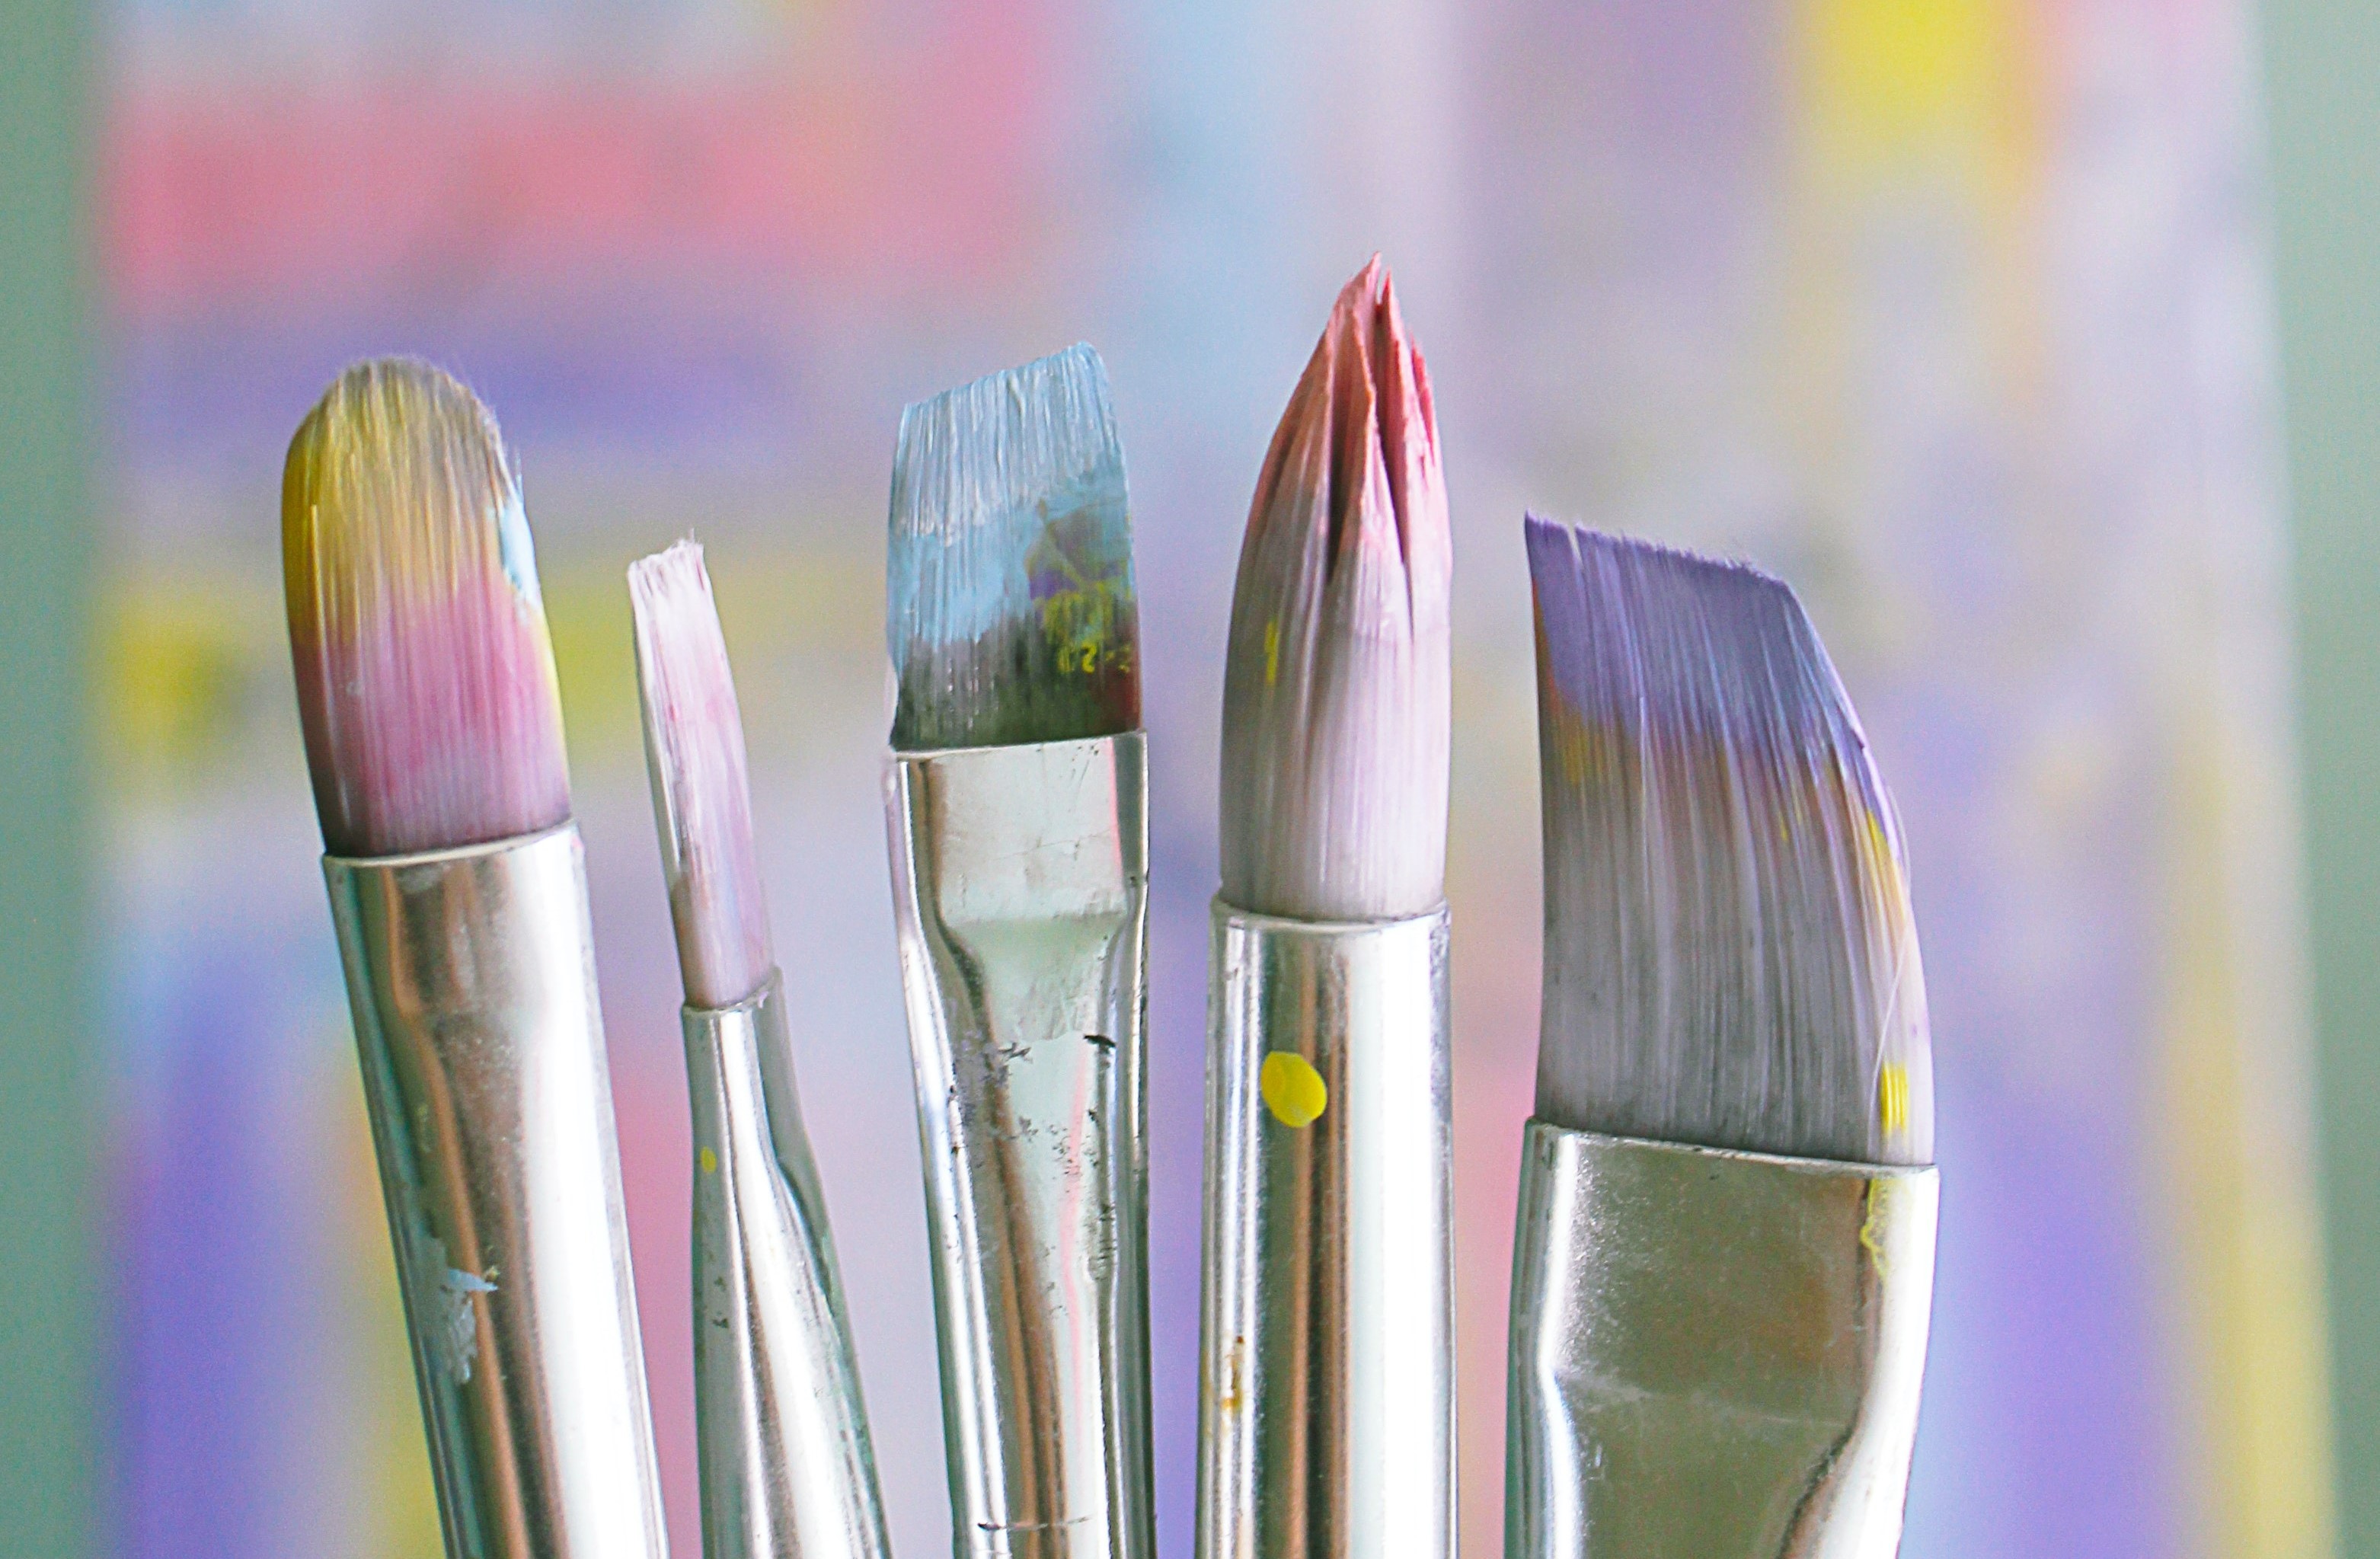 How creativity and hobbies can benefit your health and wellbeing - IC24